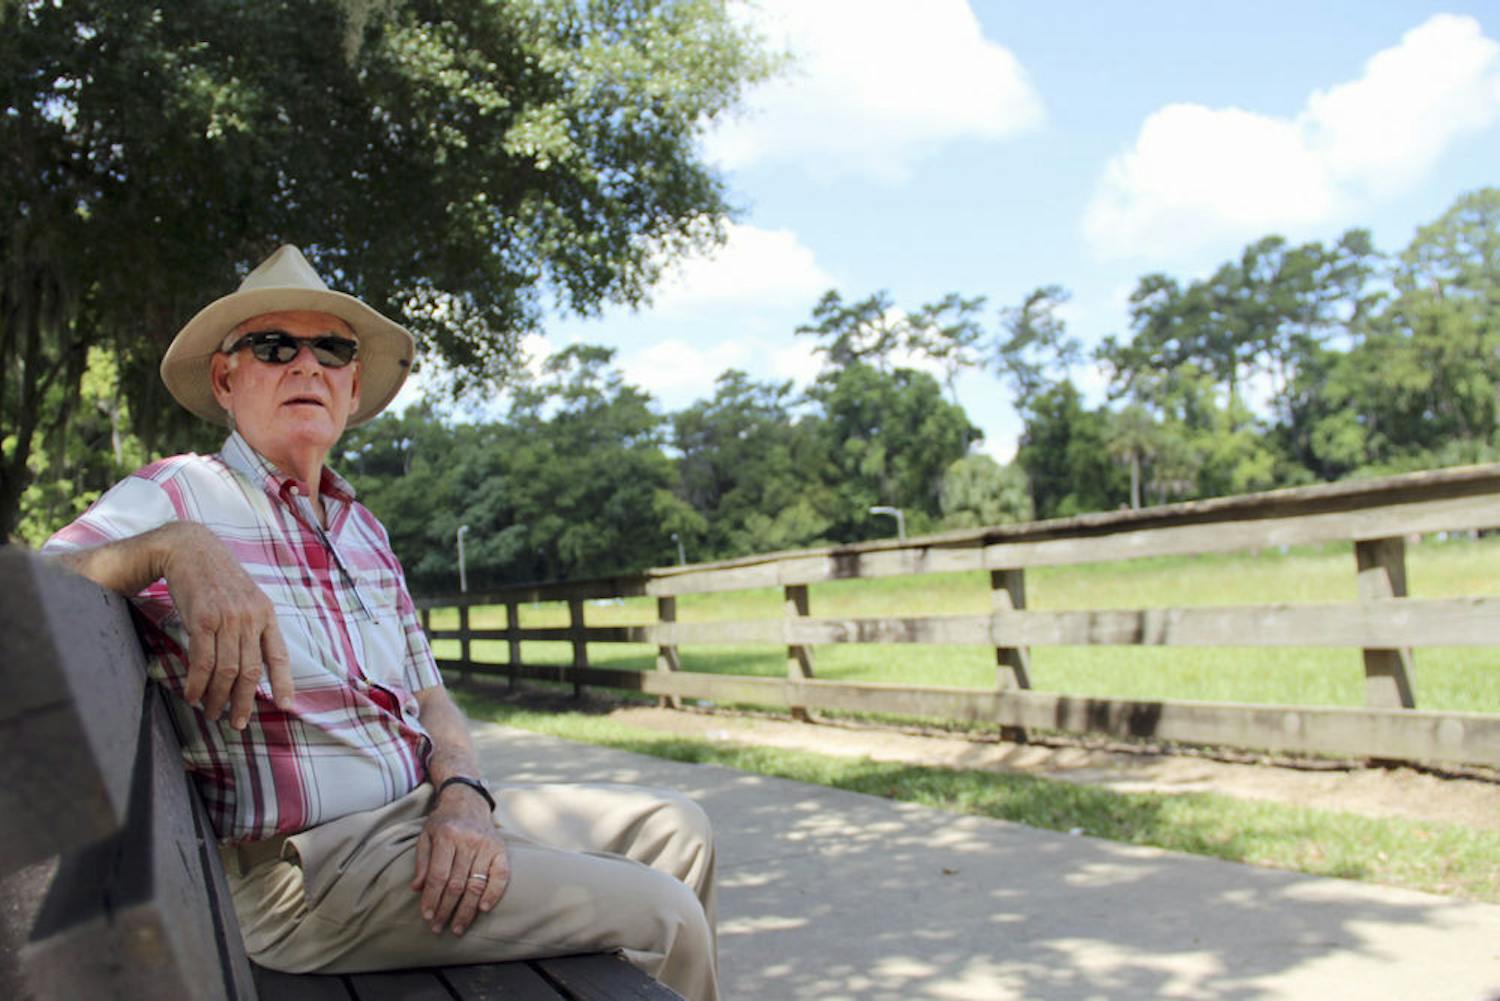 Rod McGalliard, 67, talks about why he doesn't want UF's loblolly pine trees overlooking the golf course to be removed. Nine of the trees will be cut down to increase the amount of sunlight that reaches the turf.